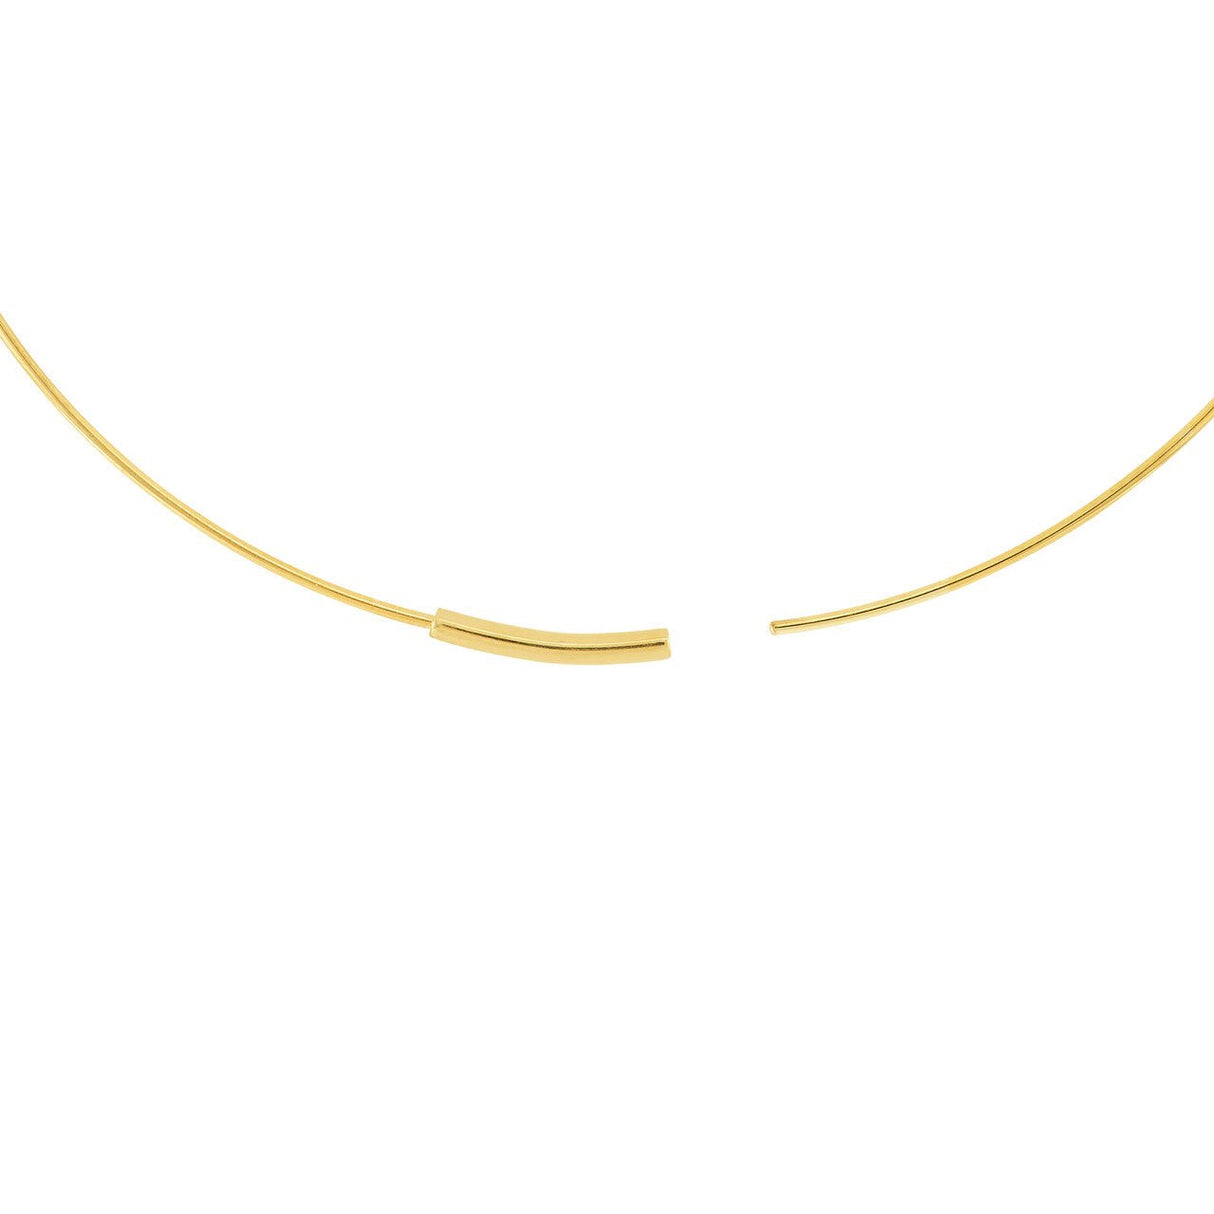 14K Gold Earrings 2023 Collection, 60mm Endless Wire Hoop Earrings,  Diamond Origin's  Collection offers luxurious, timeless elegance with their 14K Gold Earrings. Experience the perfect accessory for any outfit with these 60mm